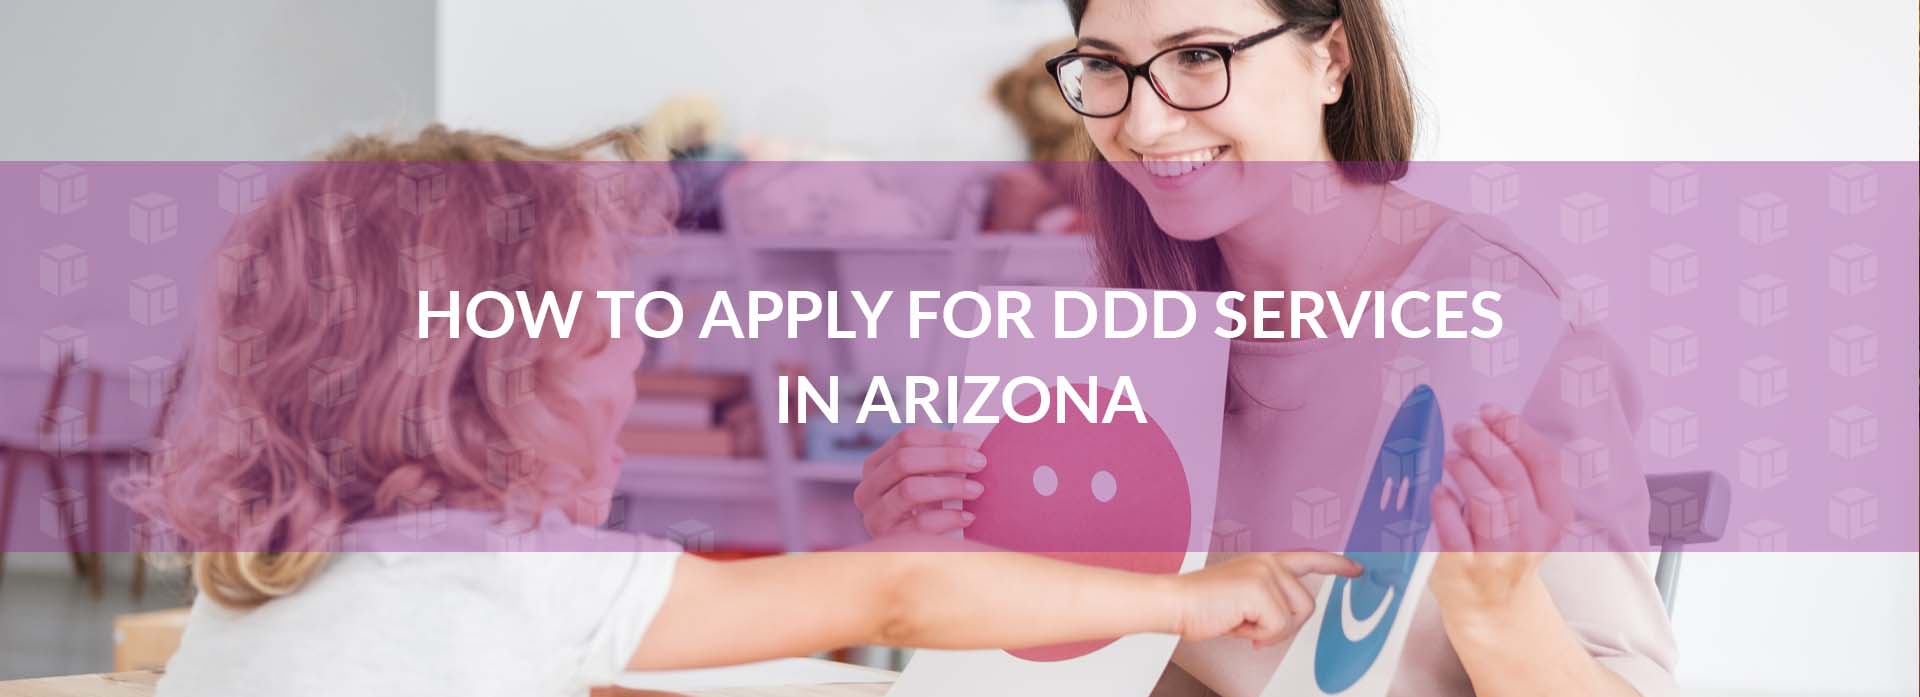 How To Apply For DDD Services In Arizona